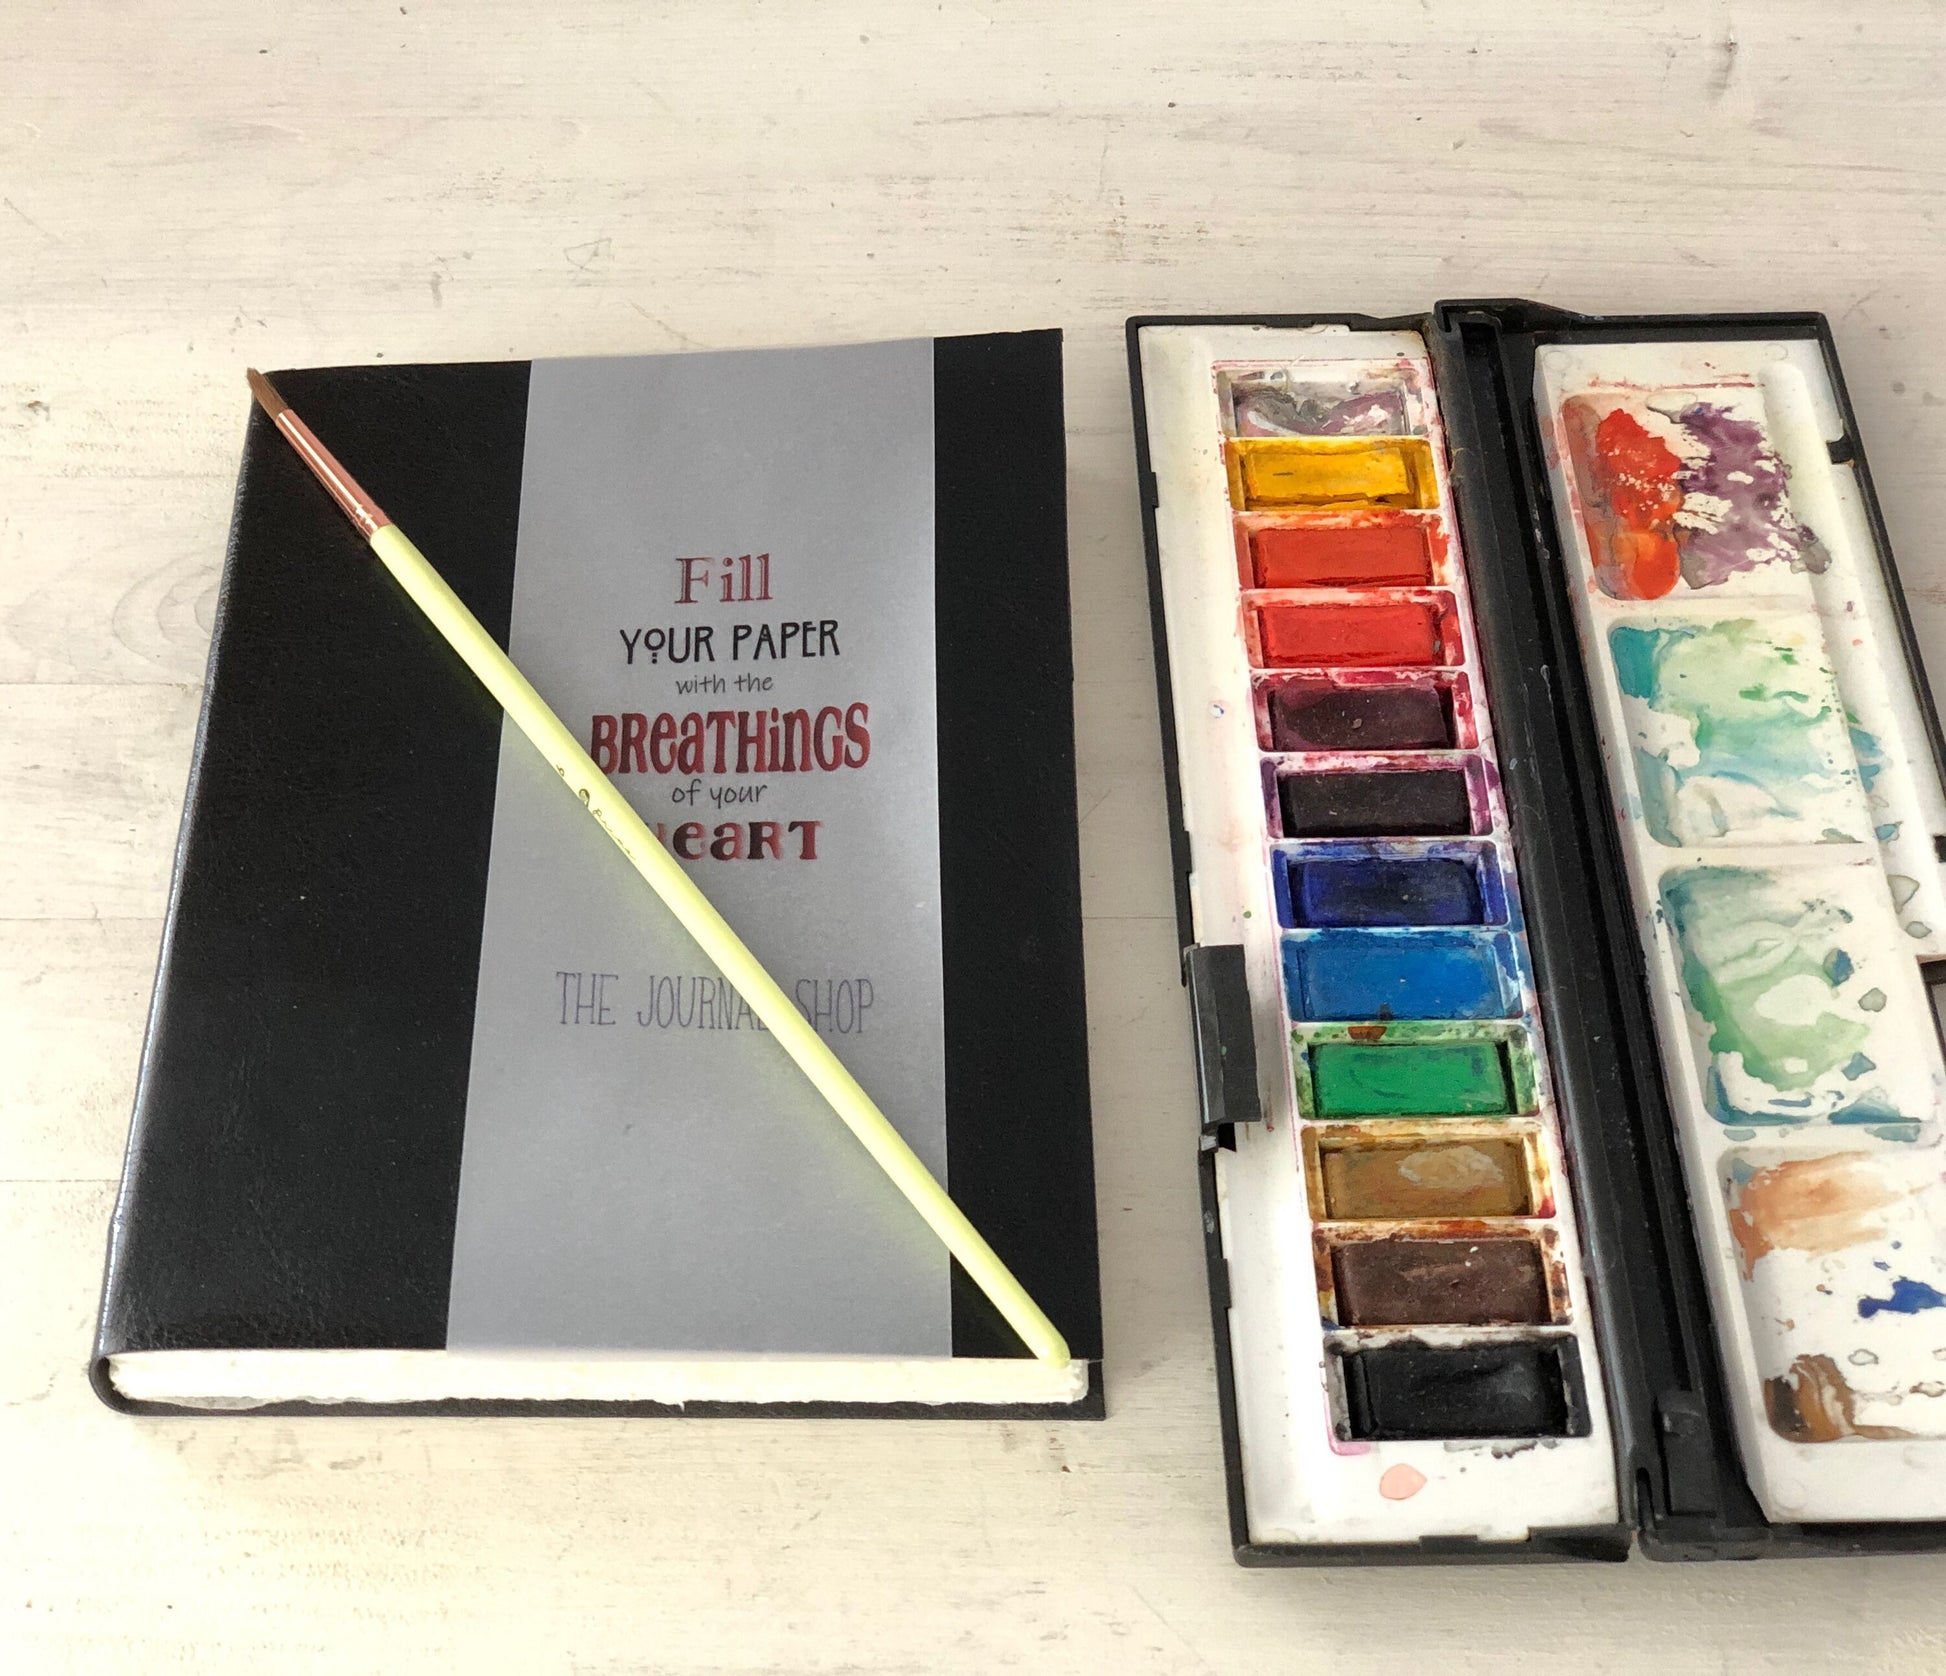 Refill Sketchpad - A5 Travel Paint Kit